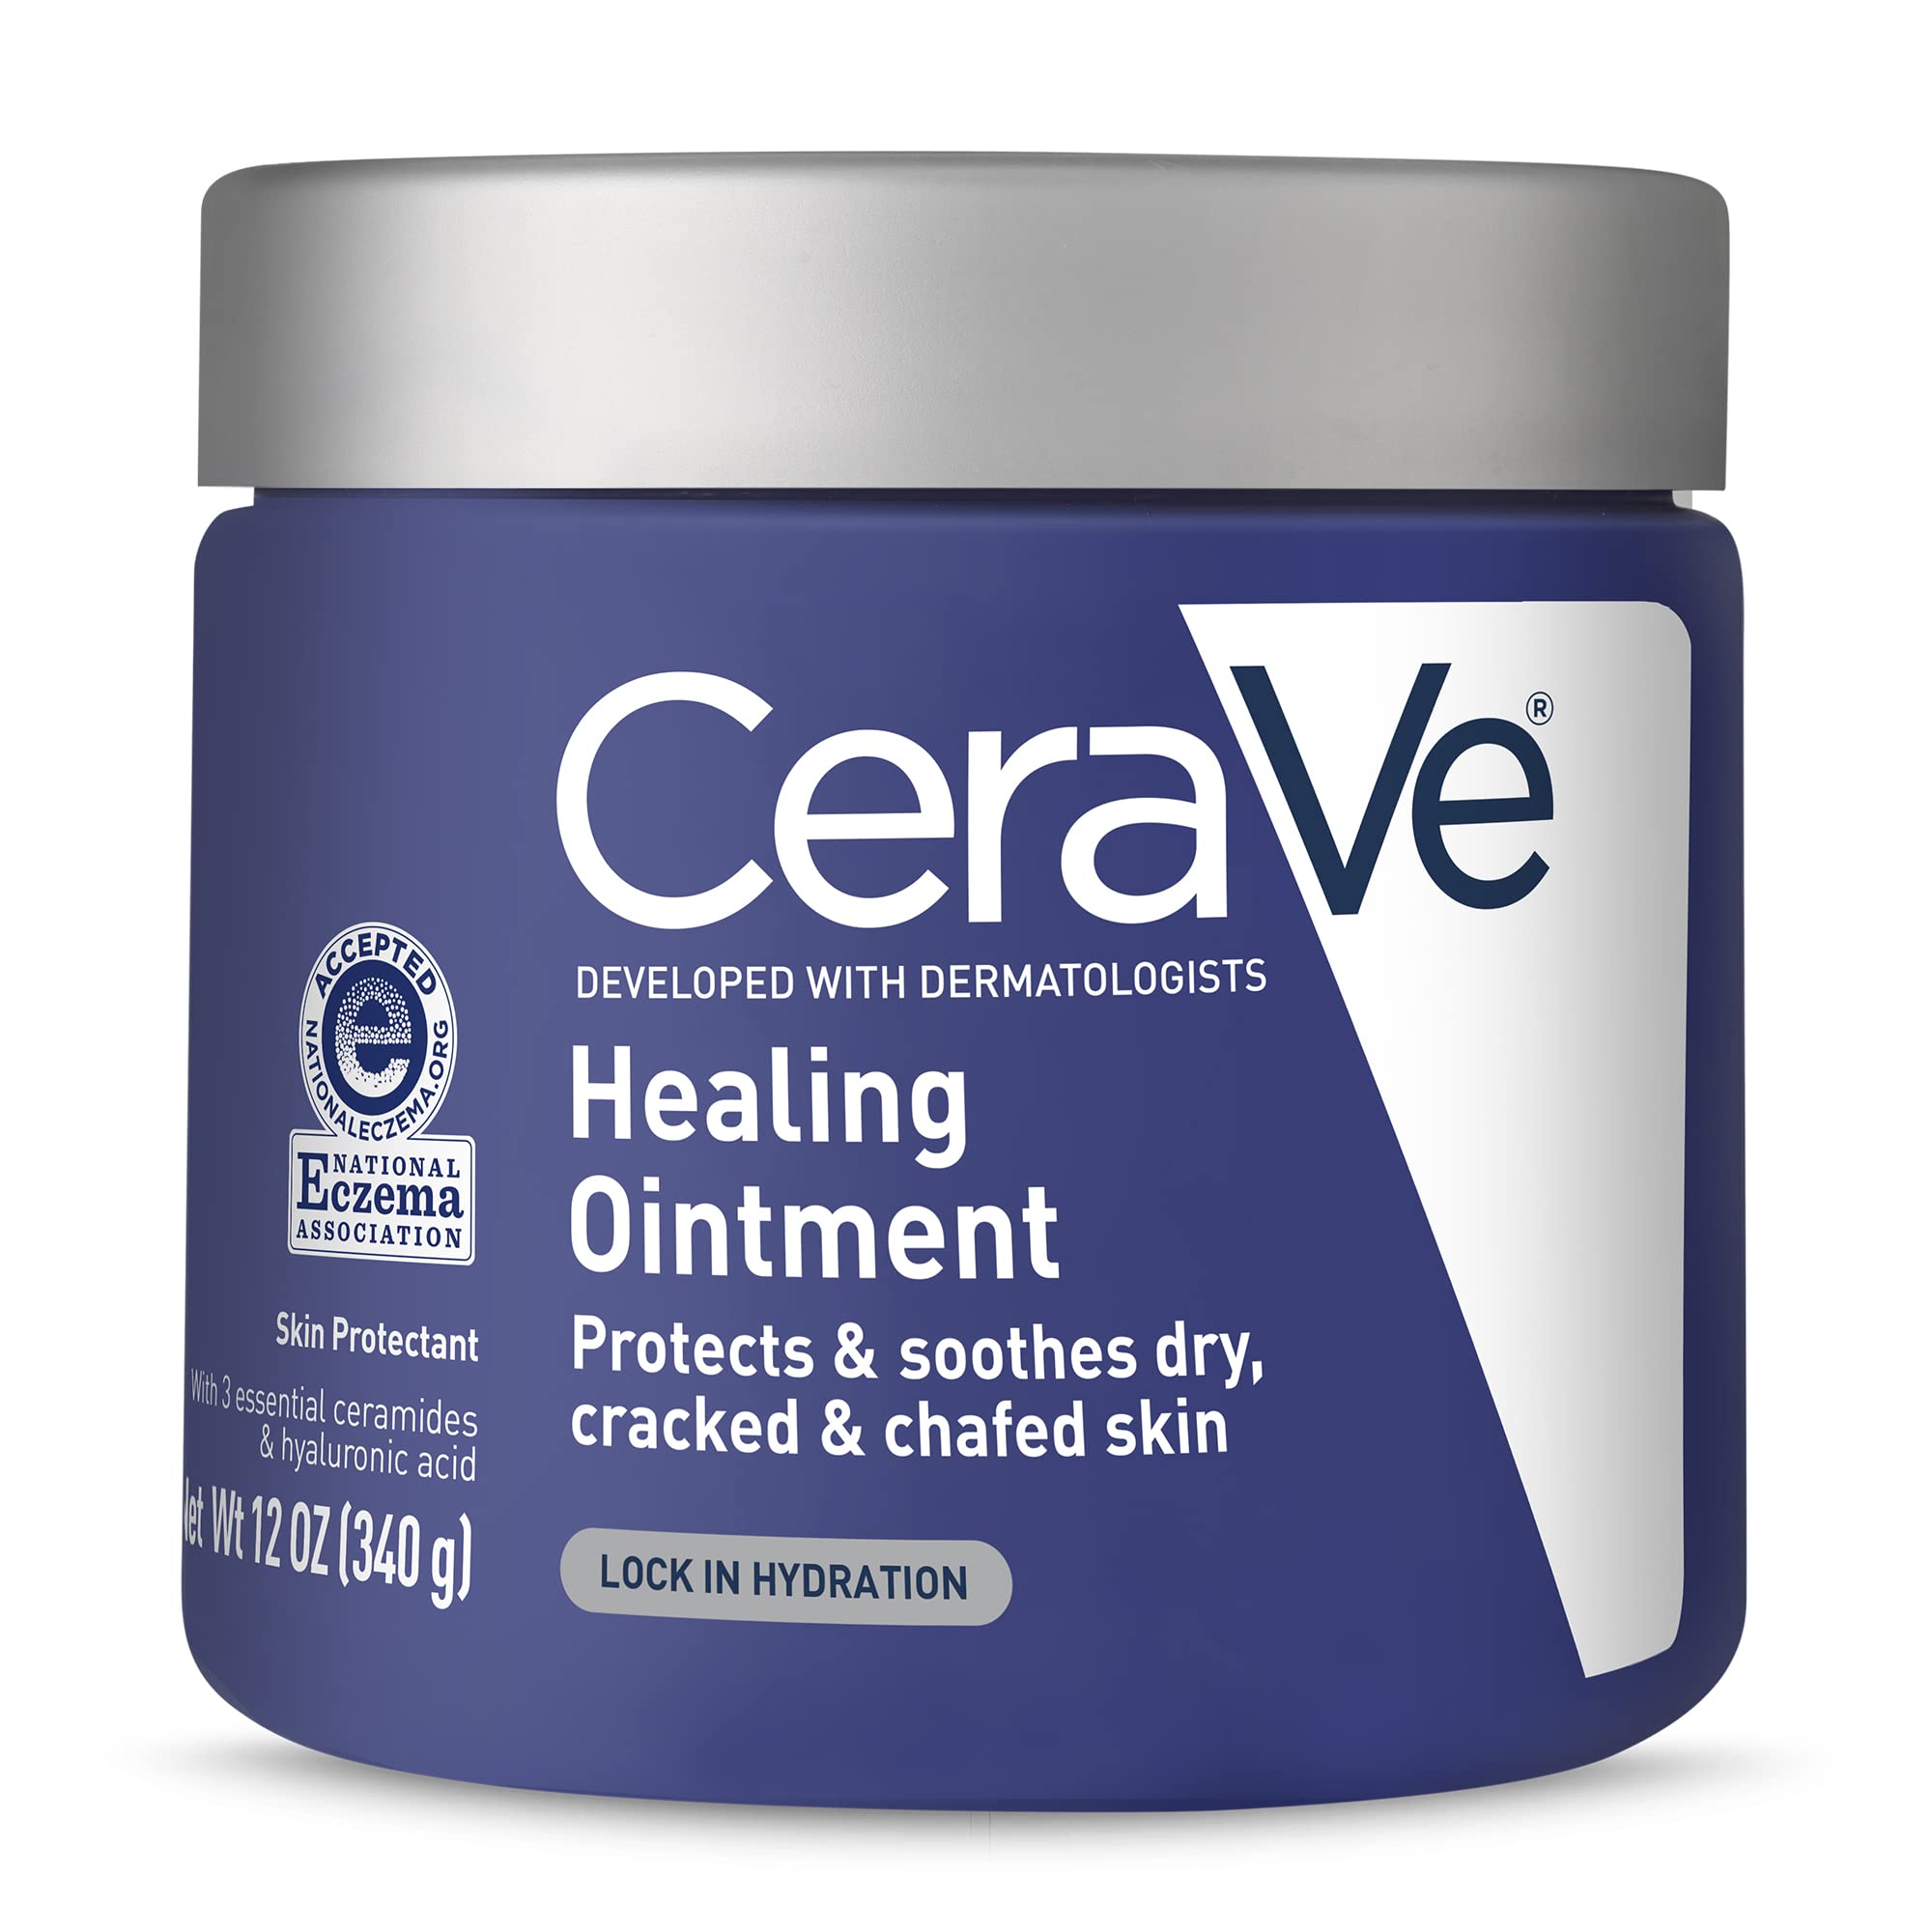 CeraVe Healing Ointment: Real Users, Real Results